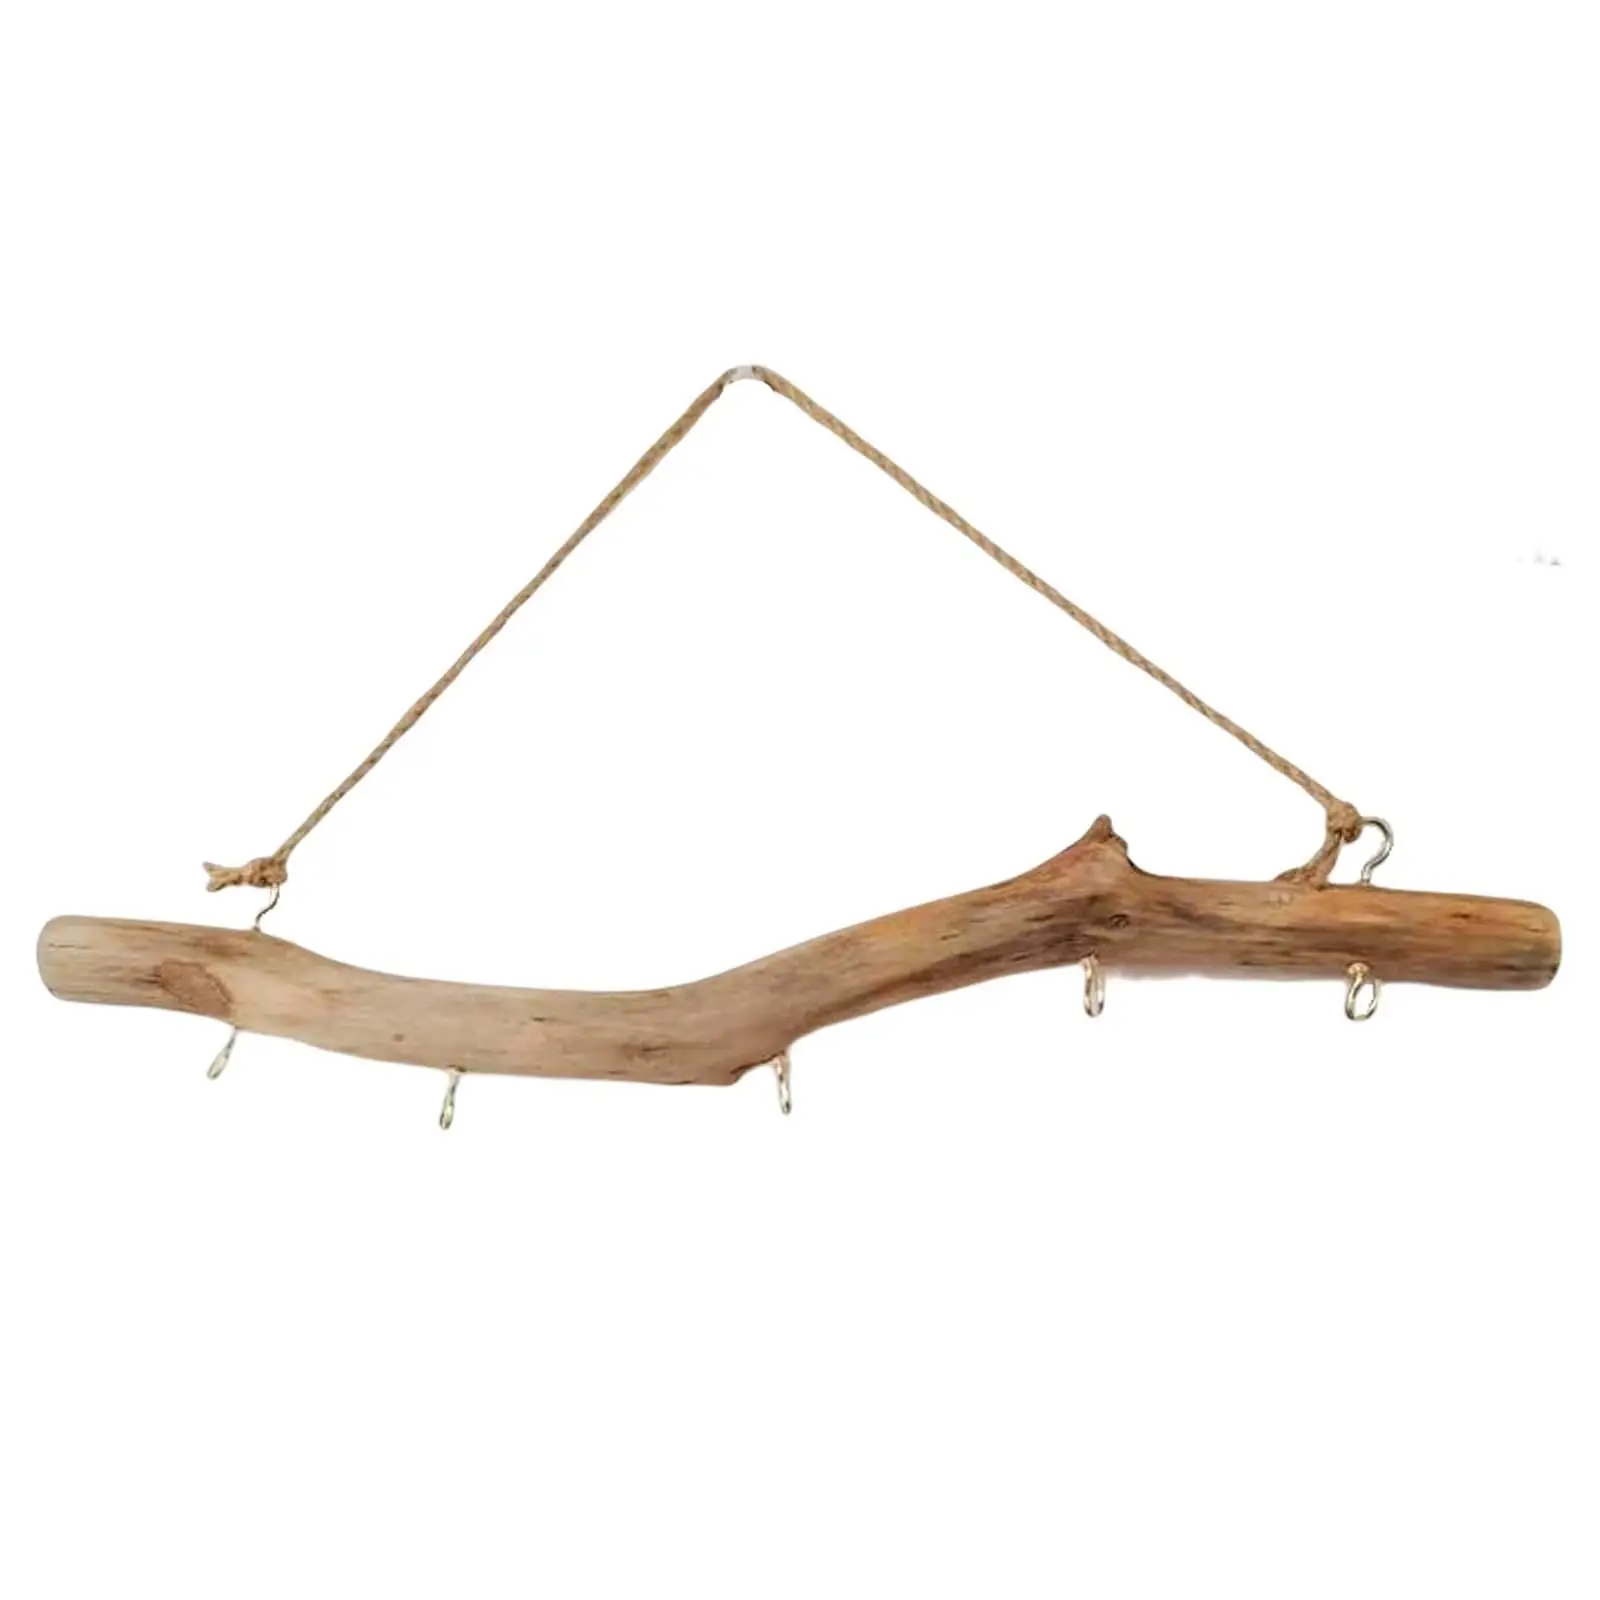 Wooden Hook Wall Mounted Driftwood Hook Centerpiece Organization Vintage Simple Using Branch Hanger Rack for Closet Room Jewelry